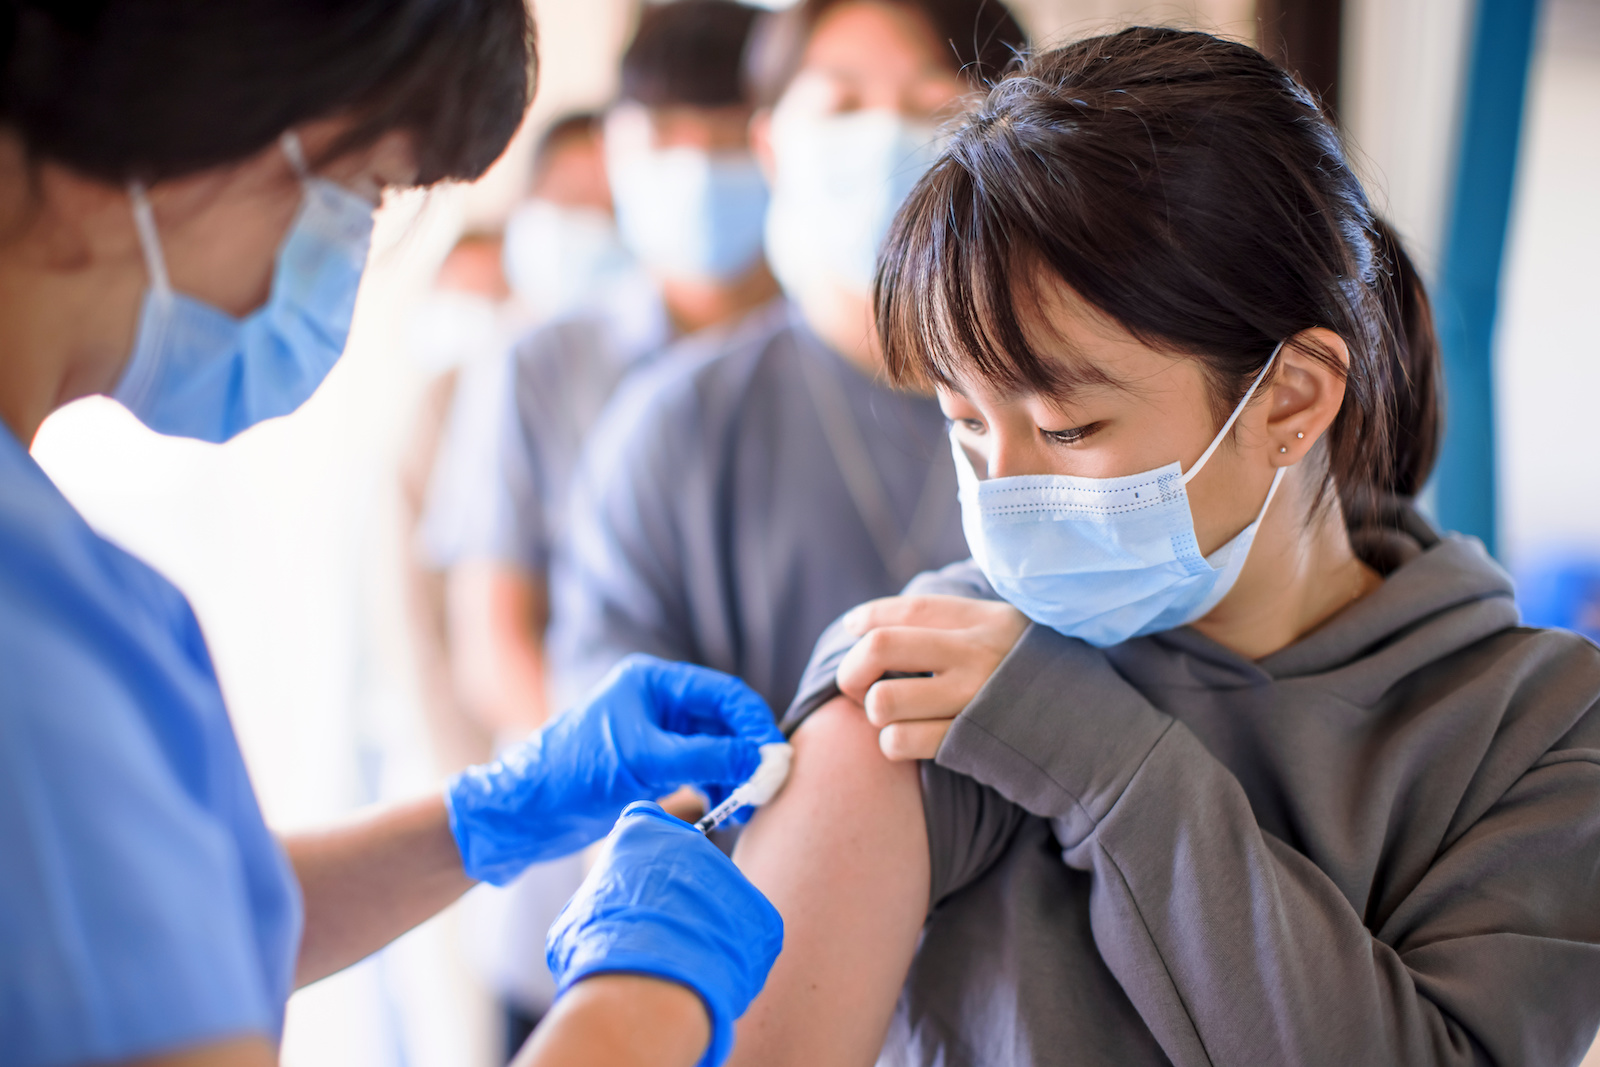 A person holds up their sleeve to receive a vaccination shot